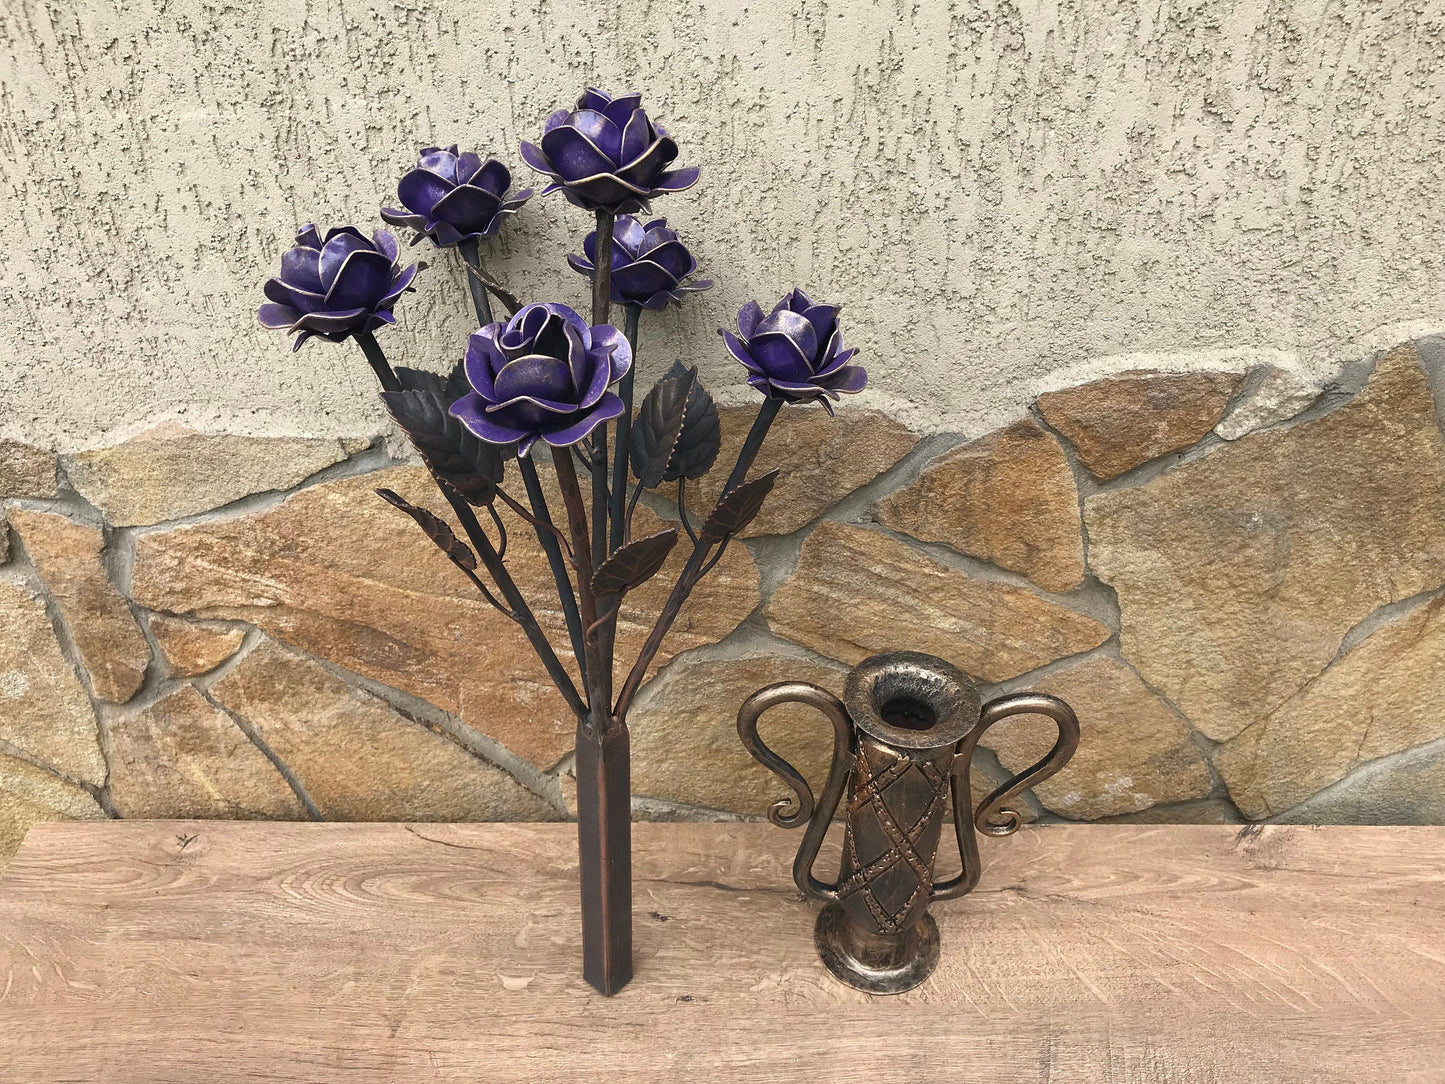 Iron bouquet in a vase, 6th anniversary gift, iron gifts, iron anniversary, hand forged rose, metal sculpture, metal rose, iron gift for her